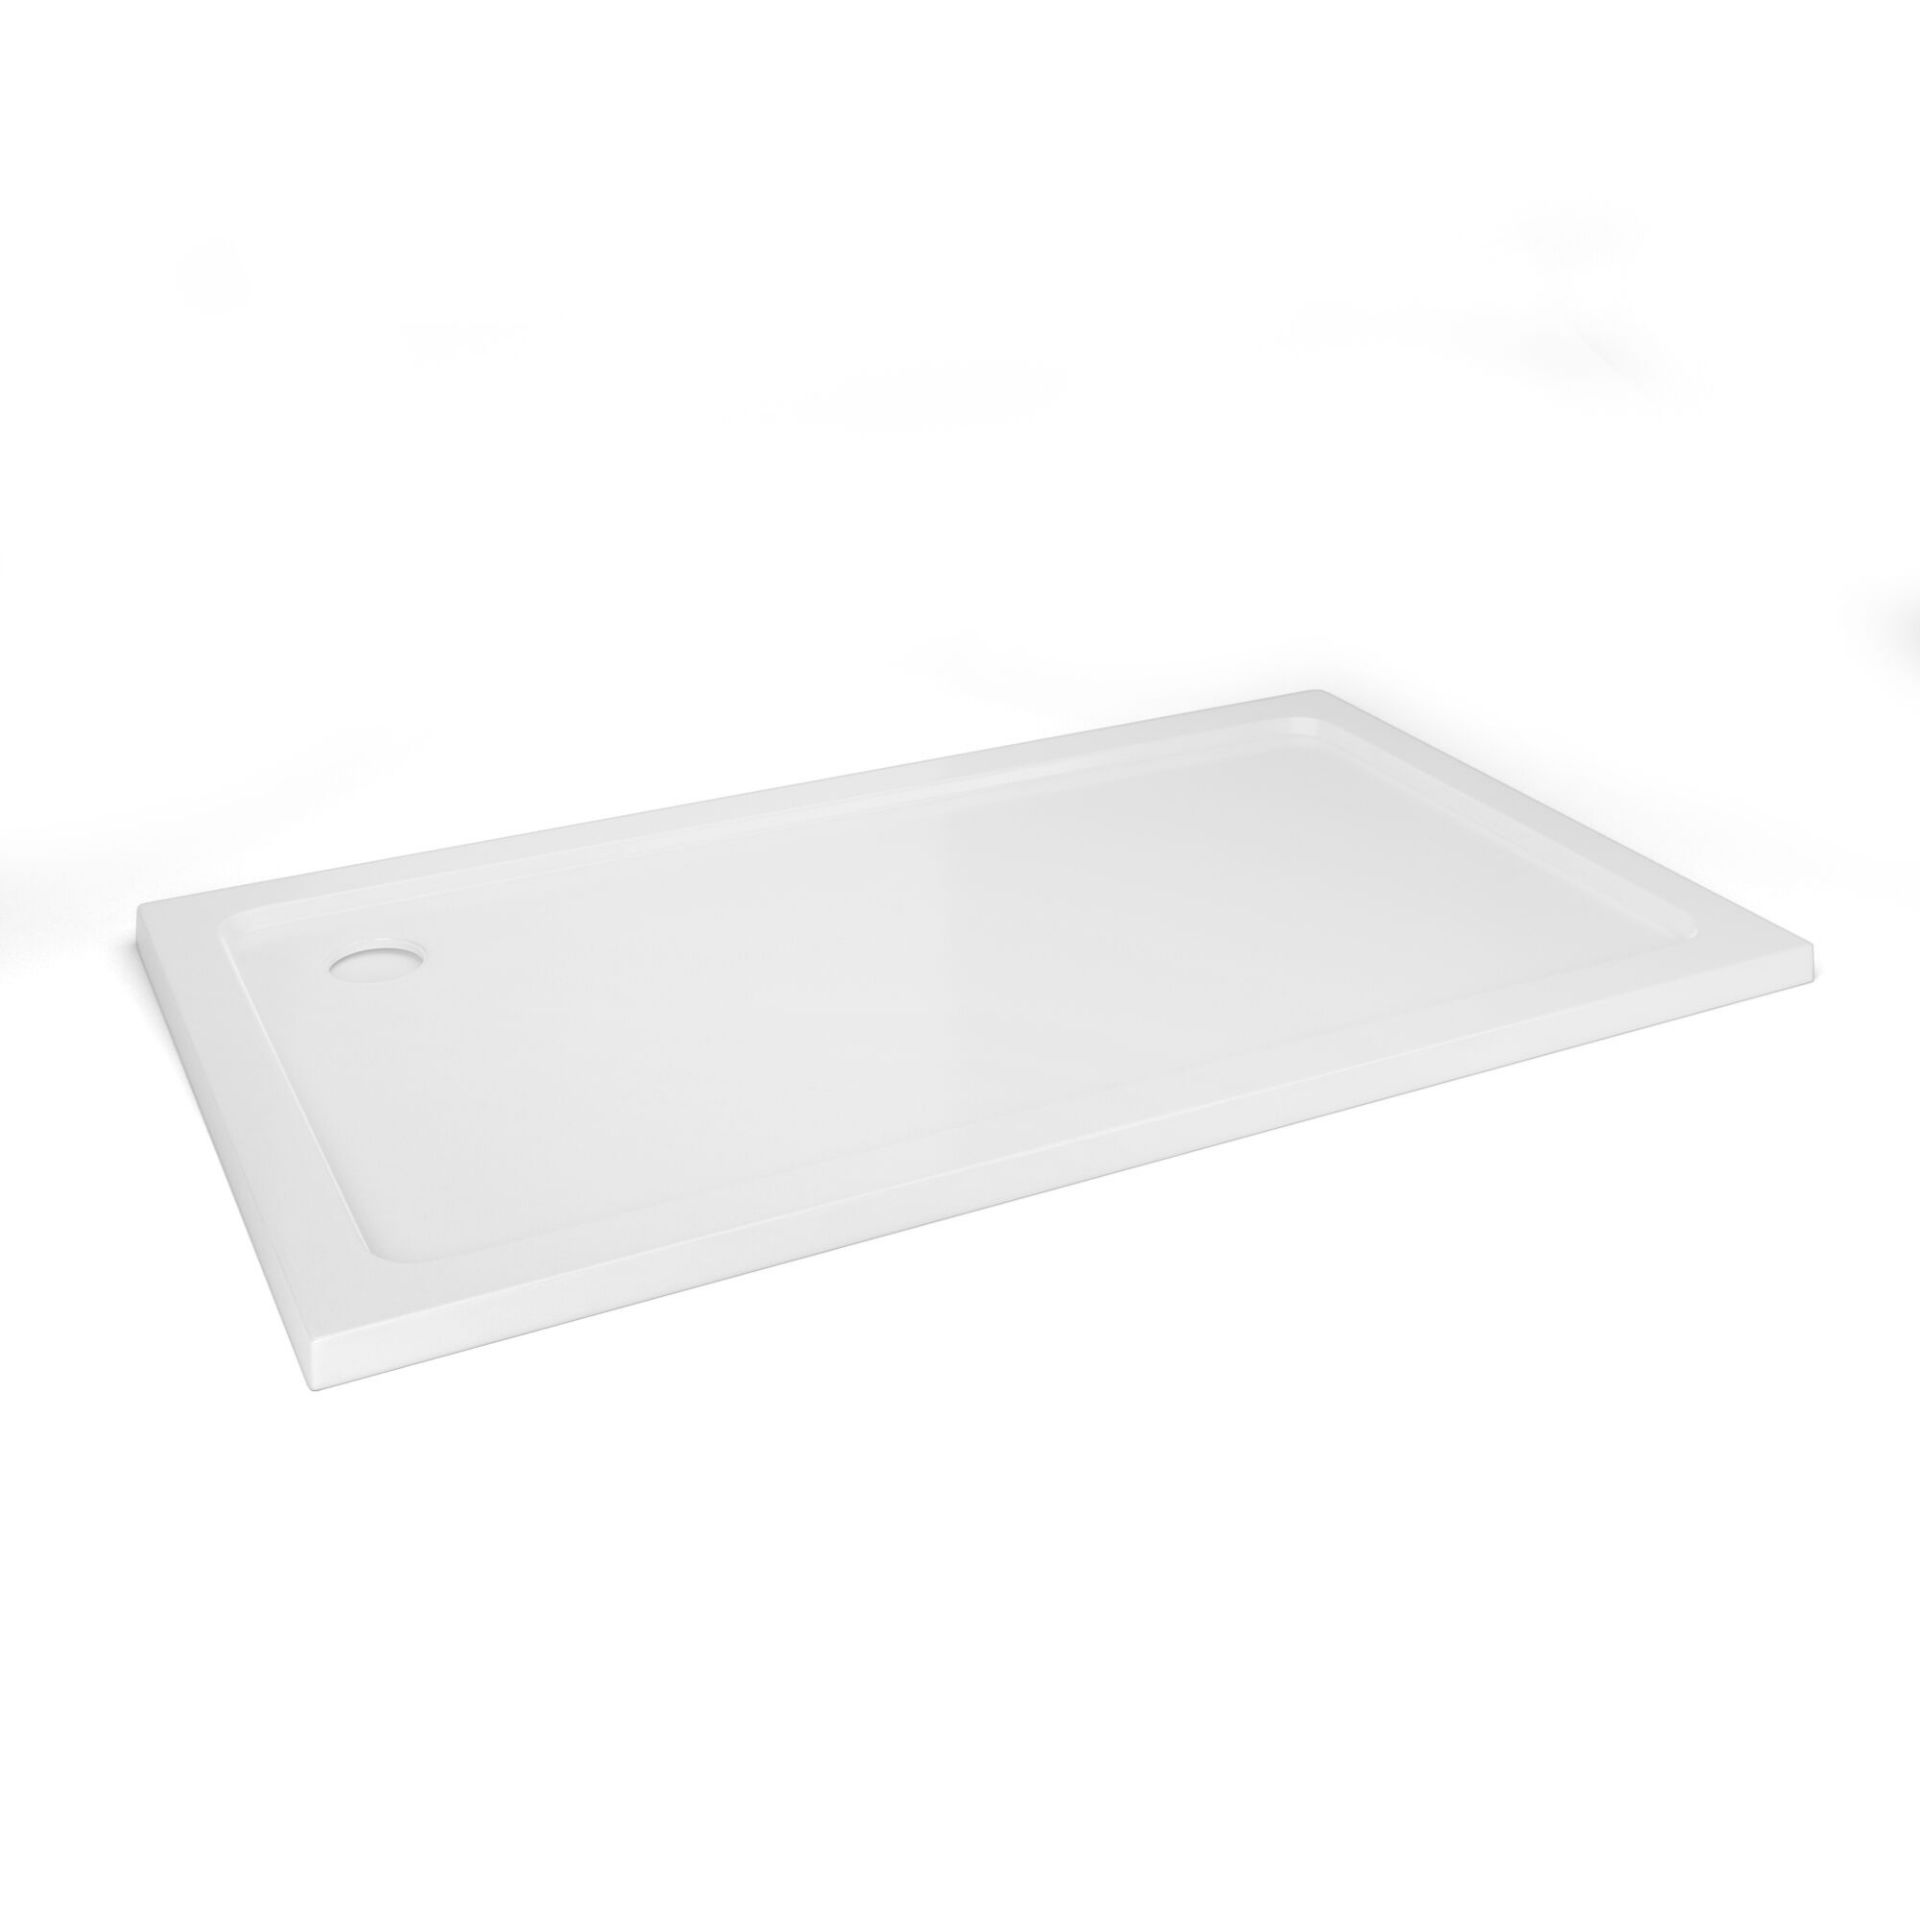 (KR77) 1400x800mm Rectangular Ultra Slim Stone Shower Tray. Constructed from acrylic capped stone - Image 2 of 2